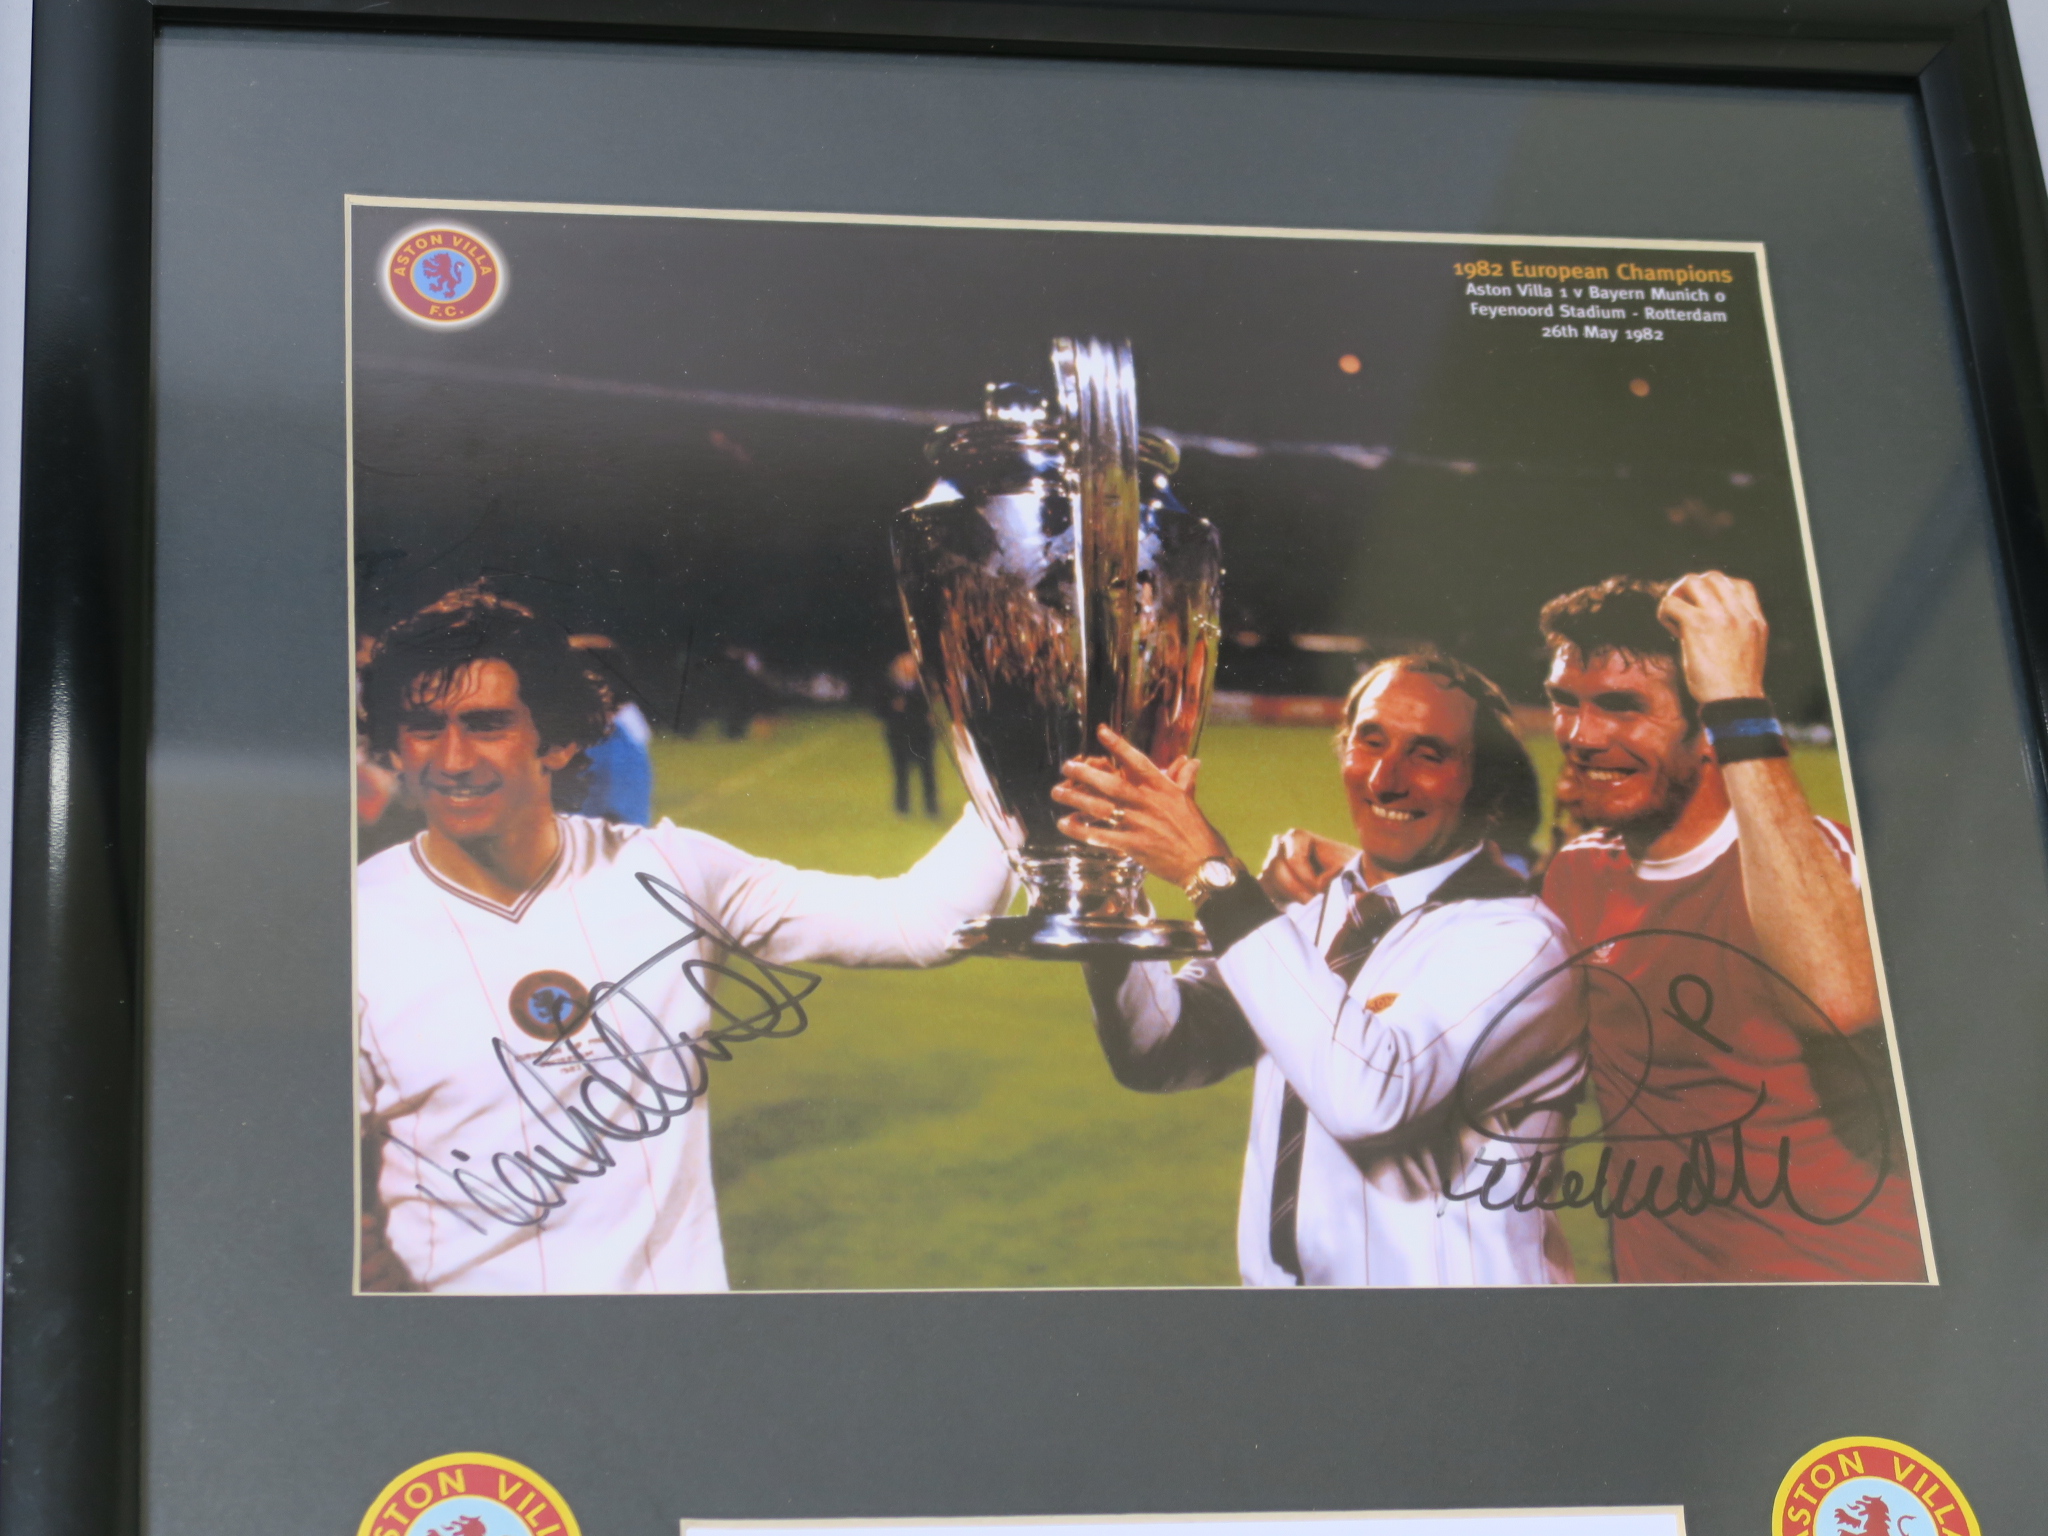 Aston Villa Football Club signed 26th May 1982 European Cup Winners limited edition print number 93 - Image 3 of 3